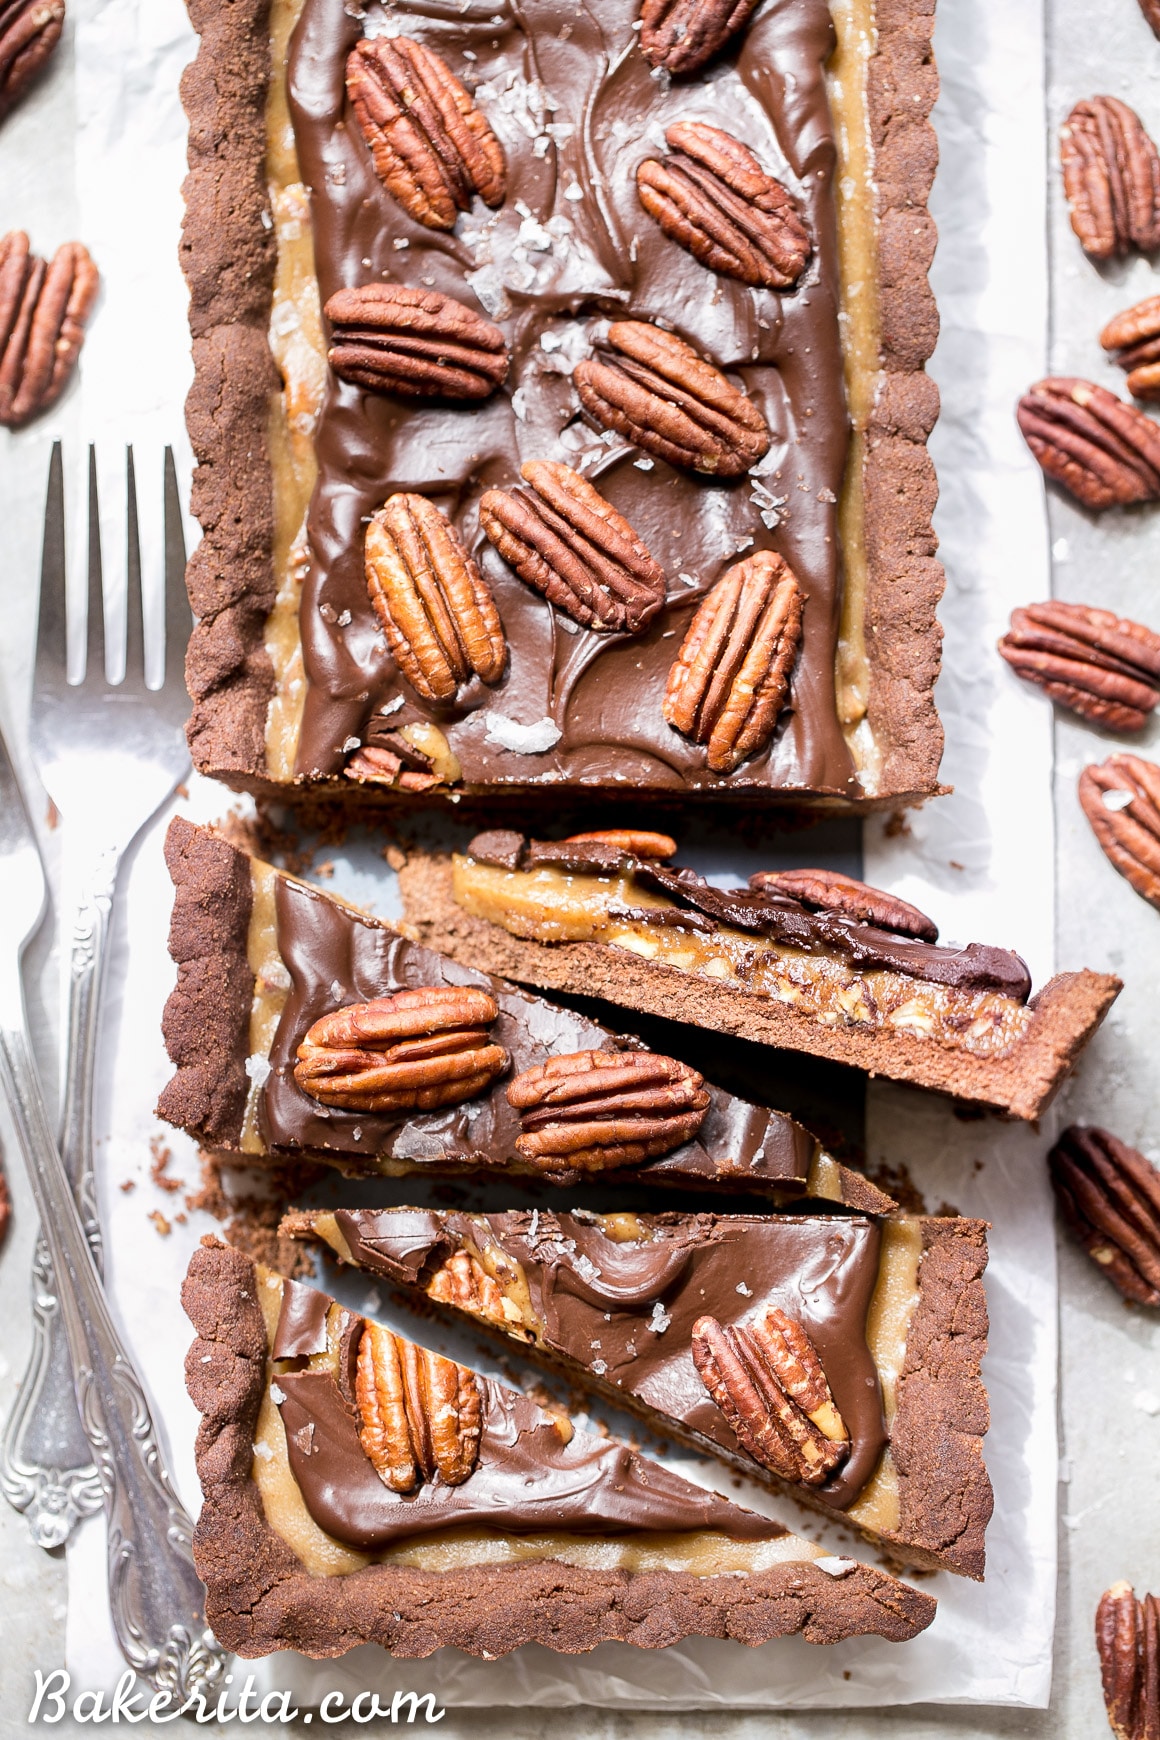 This Chocolate Pecan Tart has a chocolate shortbread crust, pecan pie filling, and is topped with dark chocolate ganache, pecans + a sprinkle of sea salt! You won't believe that this is gluten-free, Paleo, refined sugar free, and vegan.